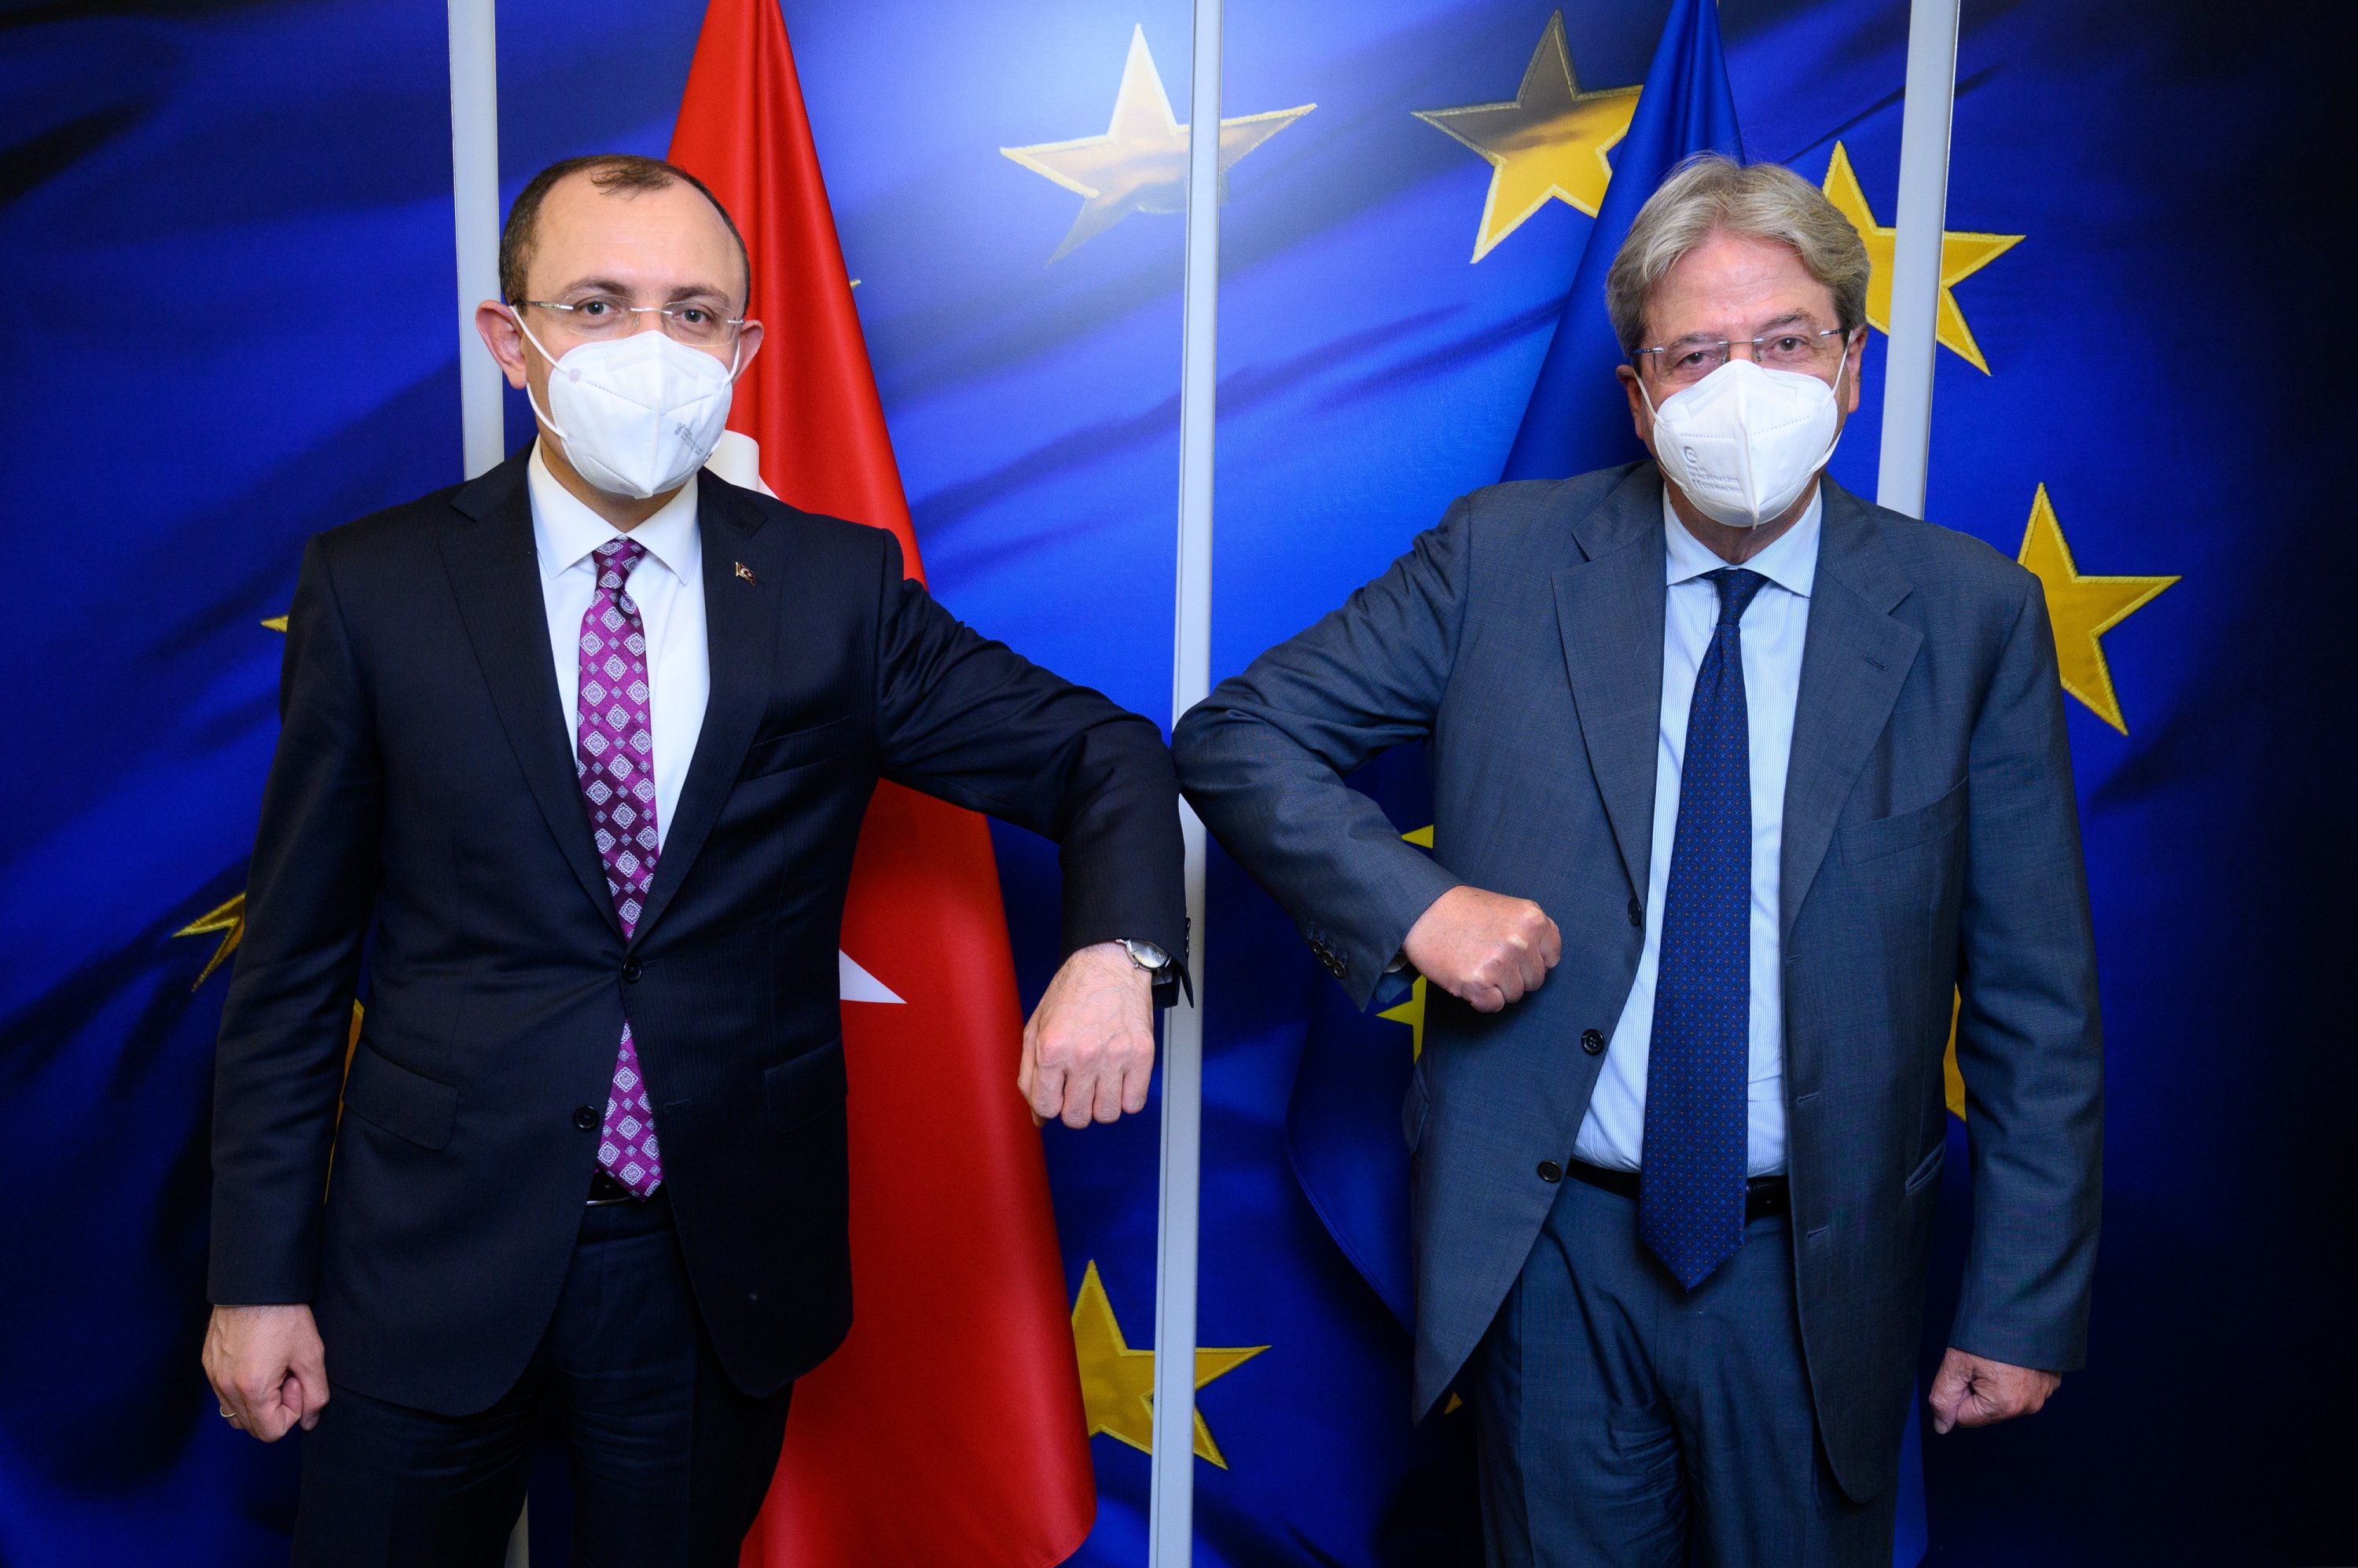 Trade Minister Mehmet Muş (L) and EU Commissioner for Economy Paolo Gentiloni elbow bump as they meet in Brussels, Belgium, June 14, 2021. (European Commission via AA)